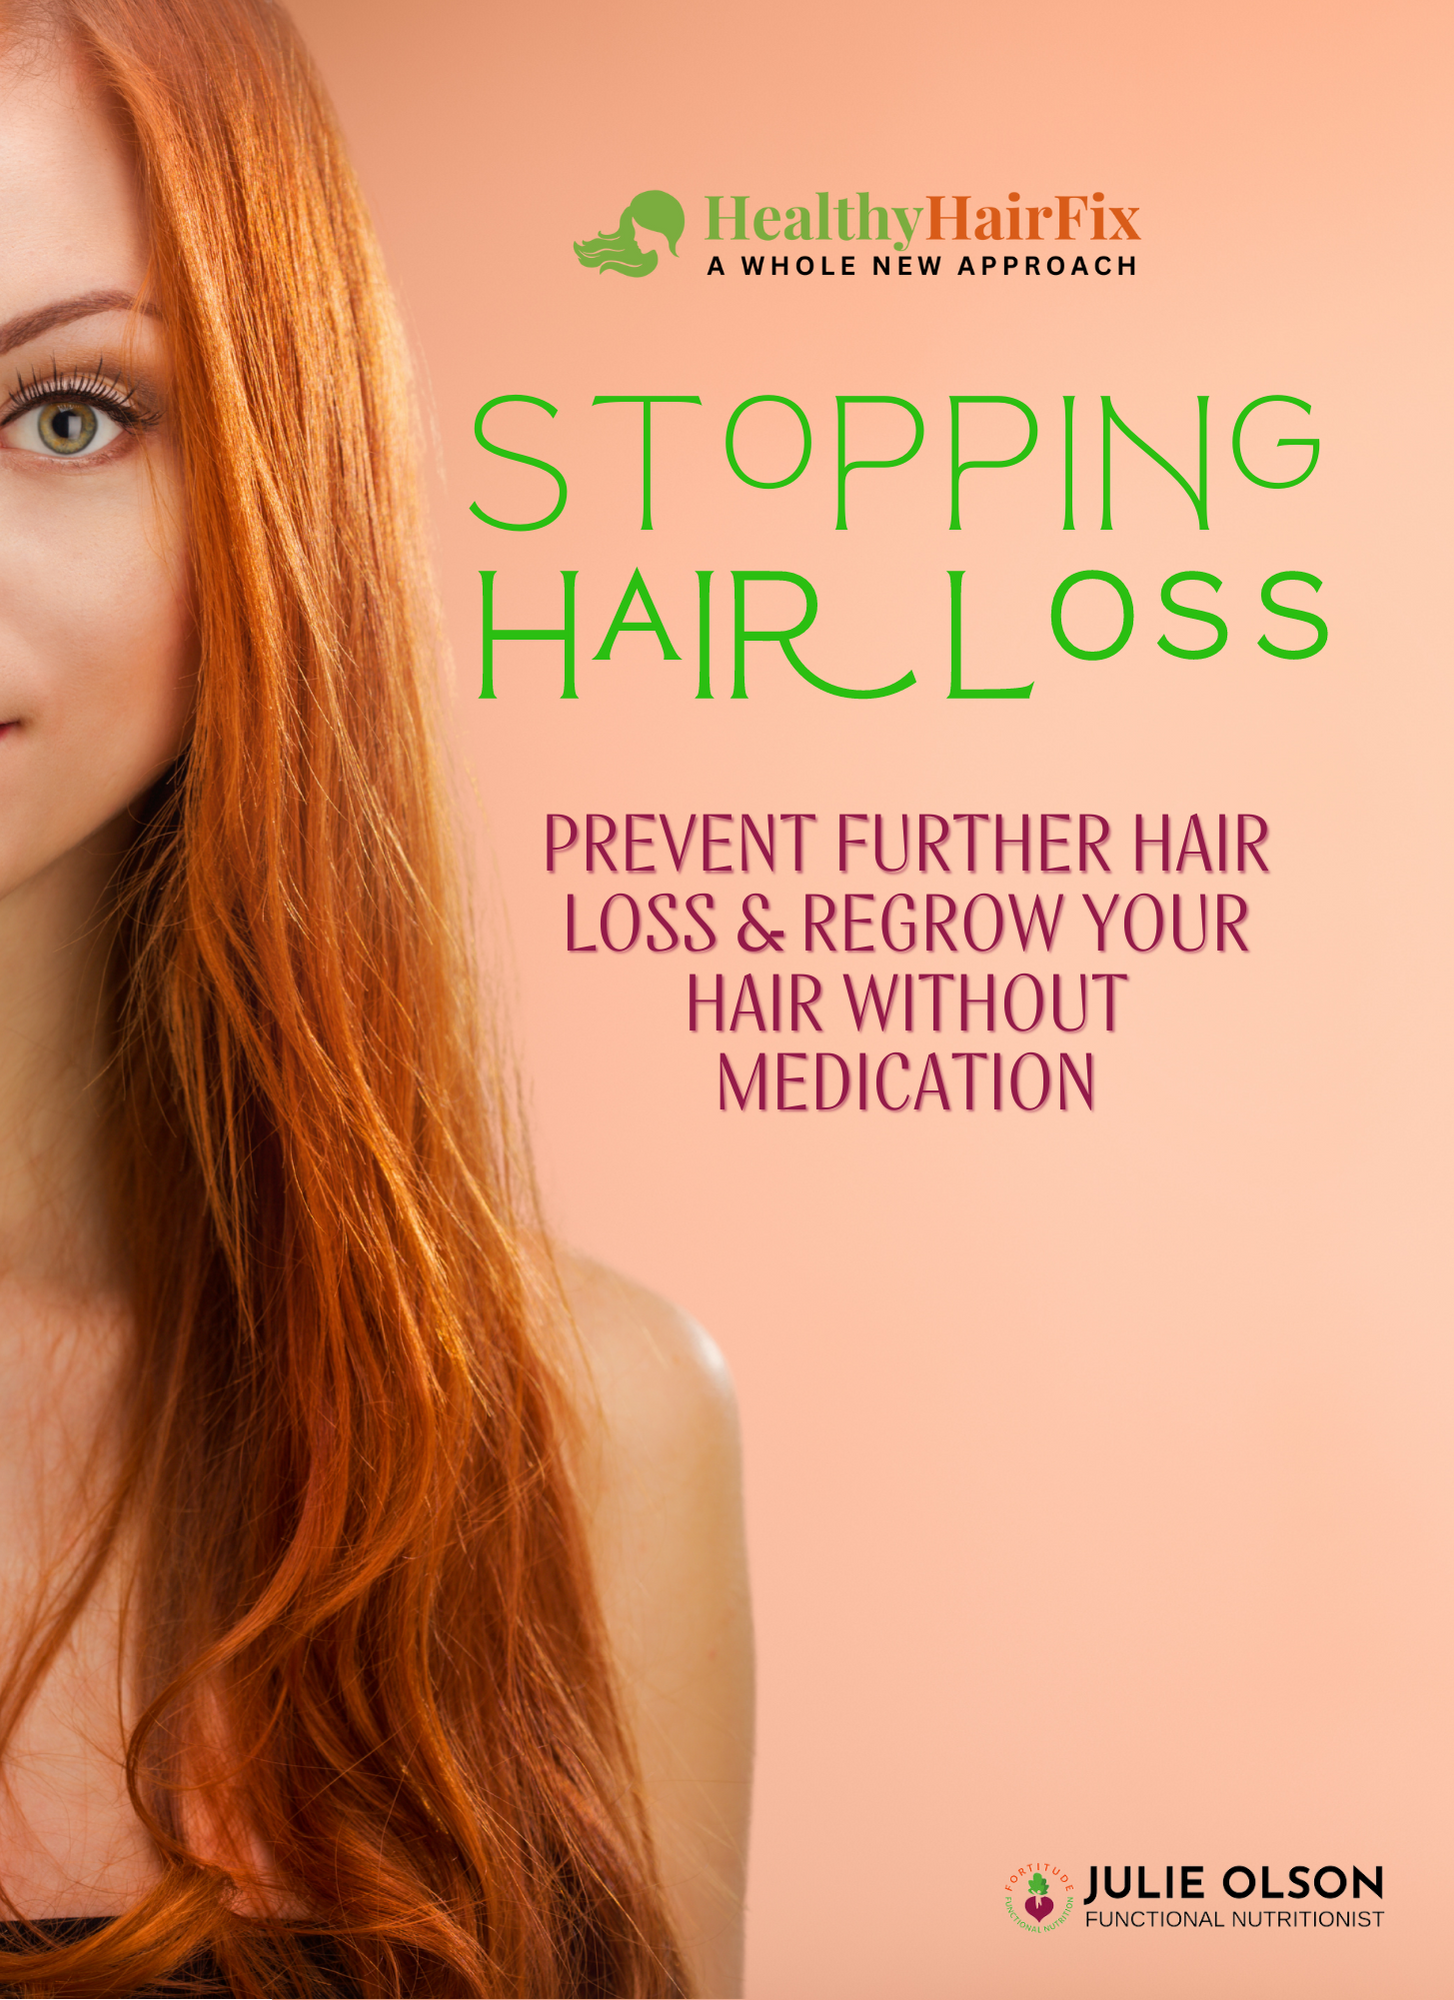 Stopping Hair Loss - Healthy HairFix eGuide